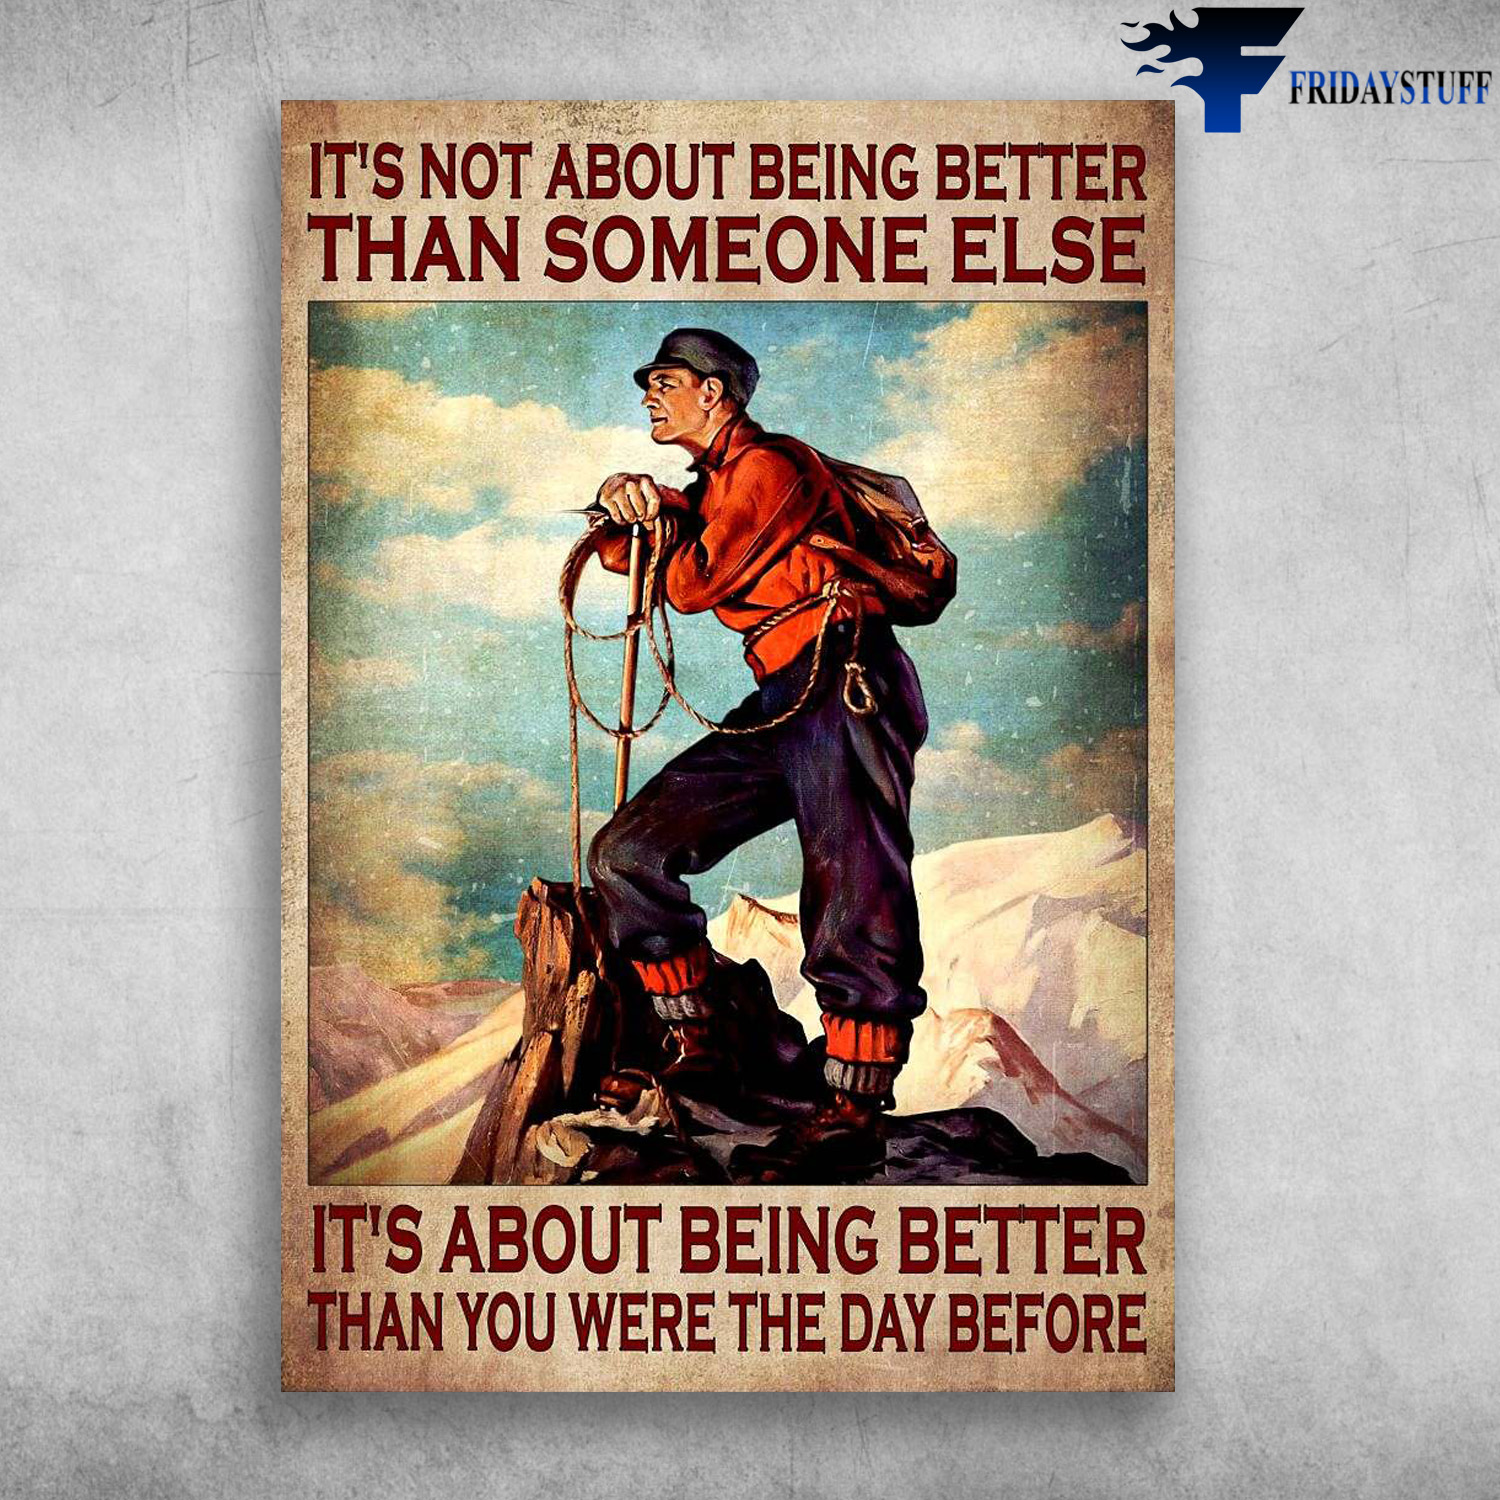 Man Climbing, Climbing Lover - It's Not About Being Better, Than Someone Else, It's About Being Better, Than You Were The Day Before